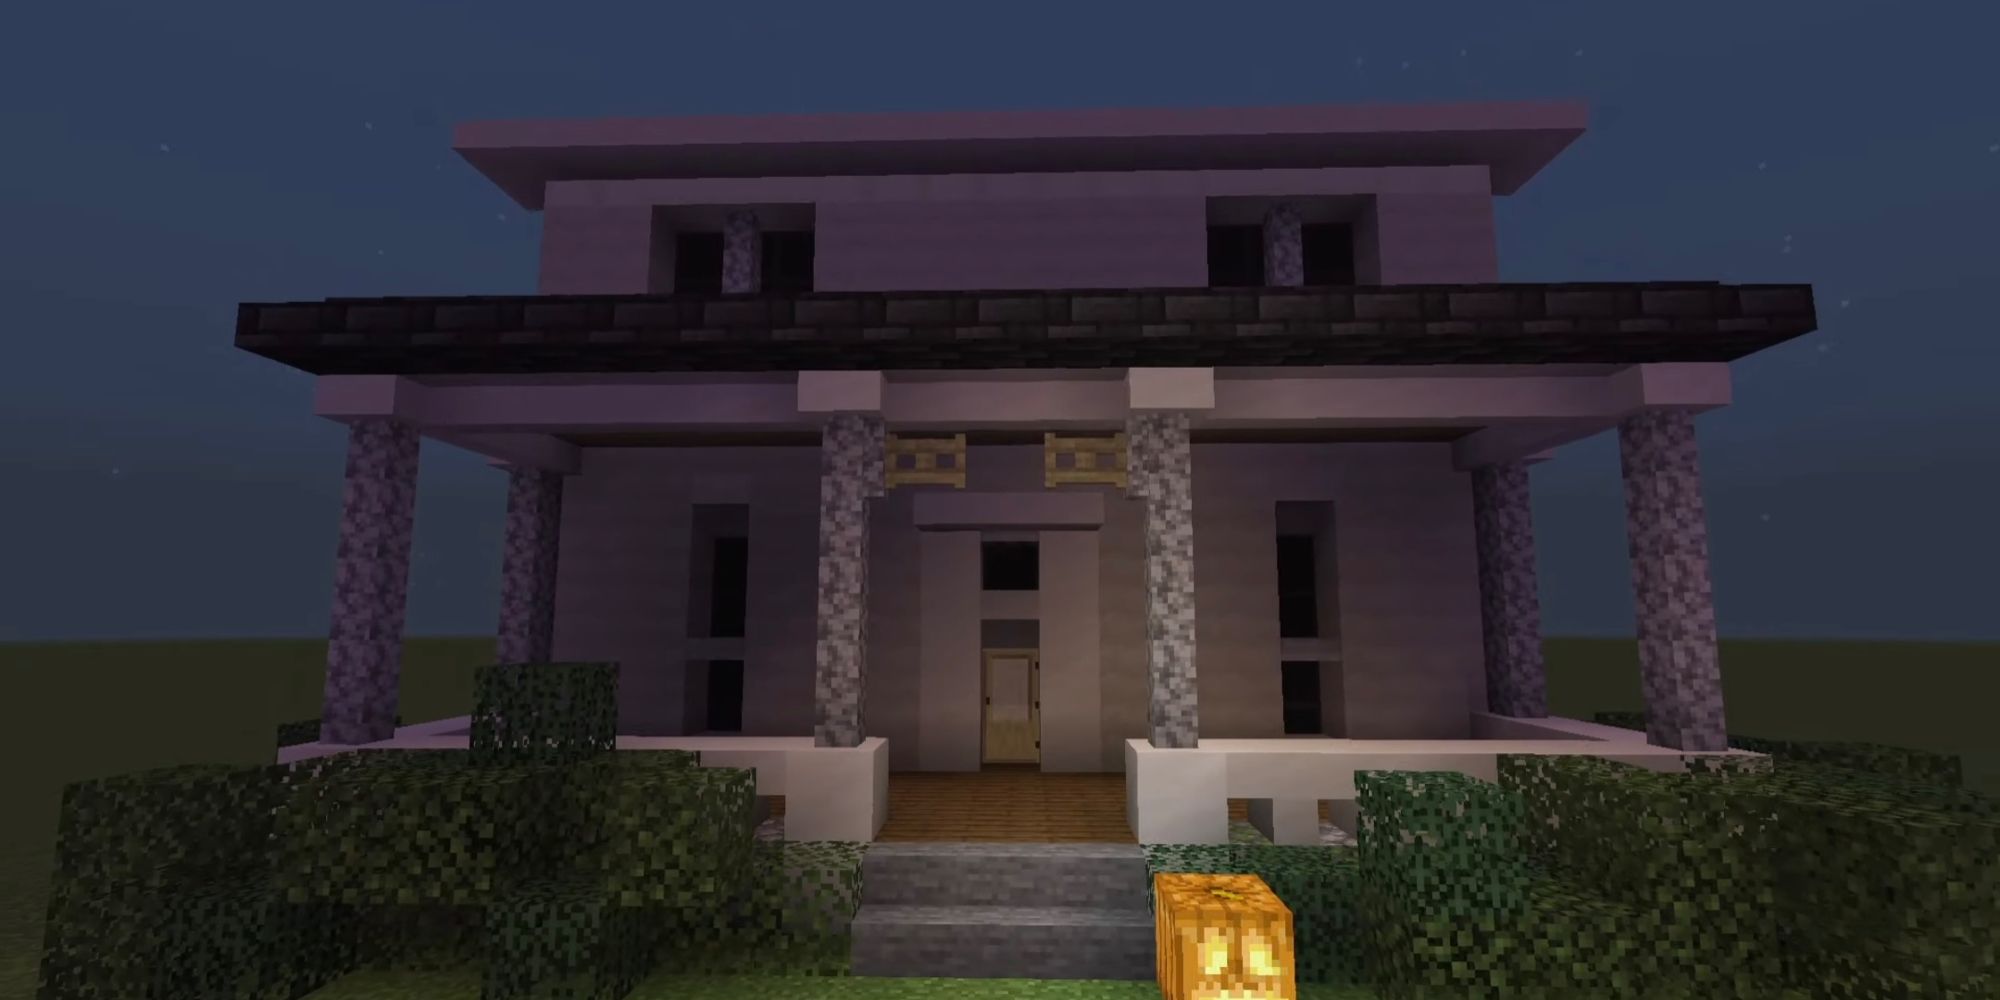 An image from Minecraft of Michael Myers’ house, from the popular horror franchise Halloween.